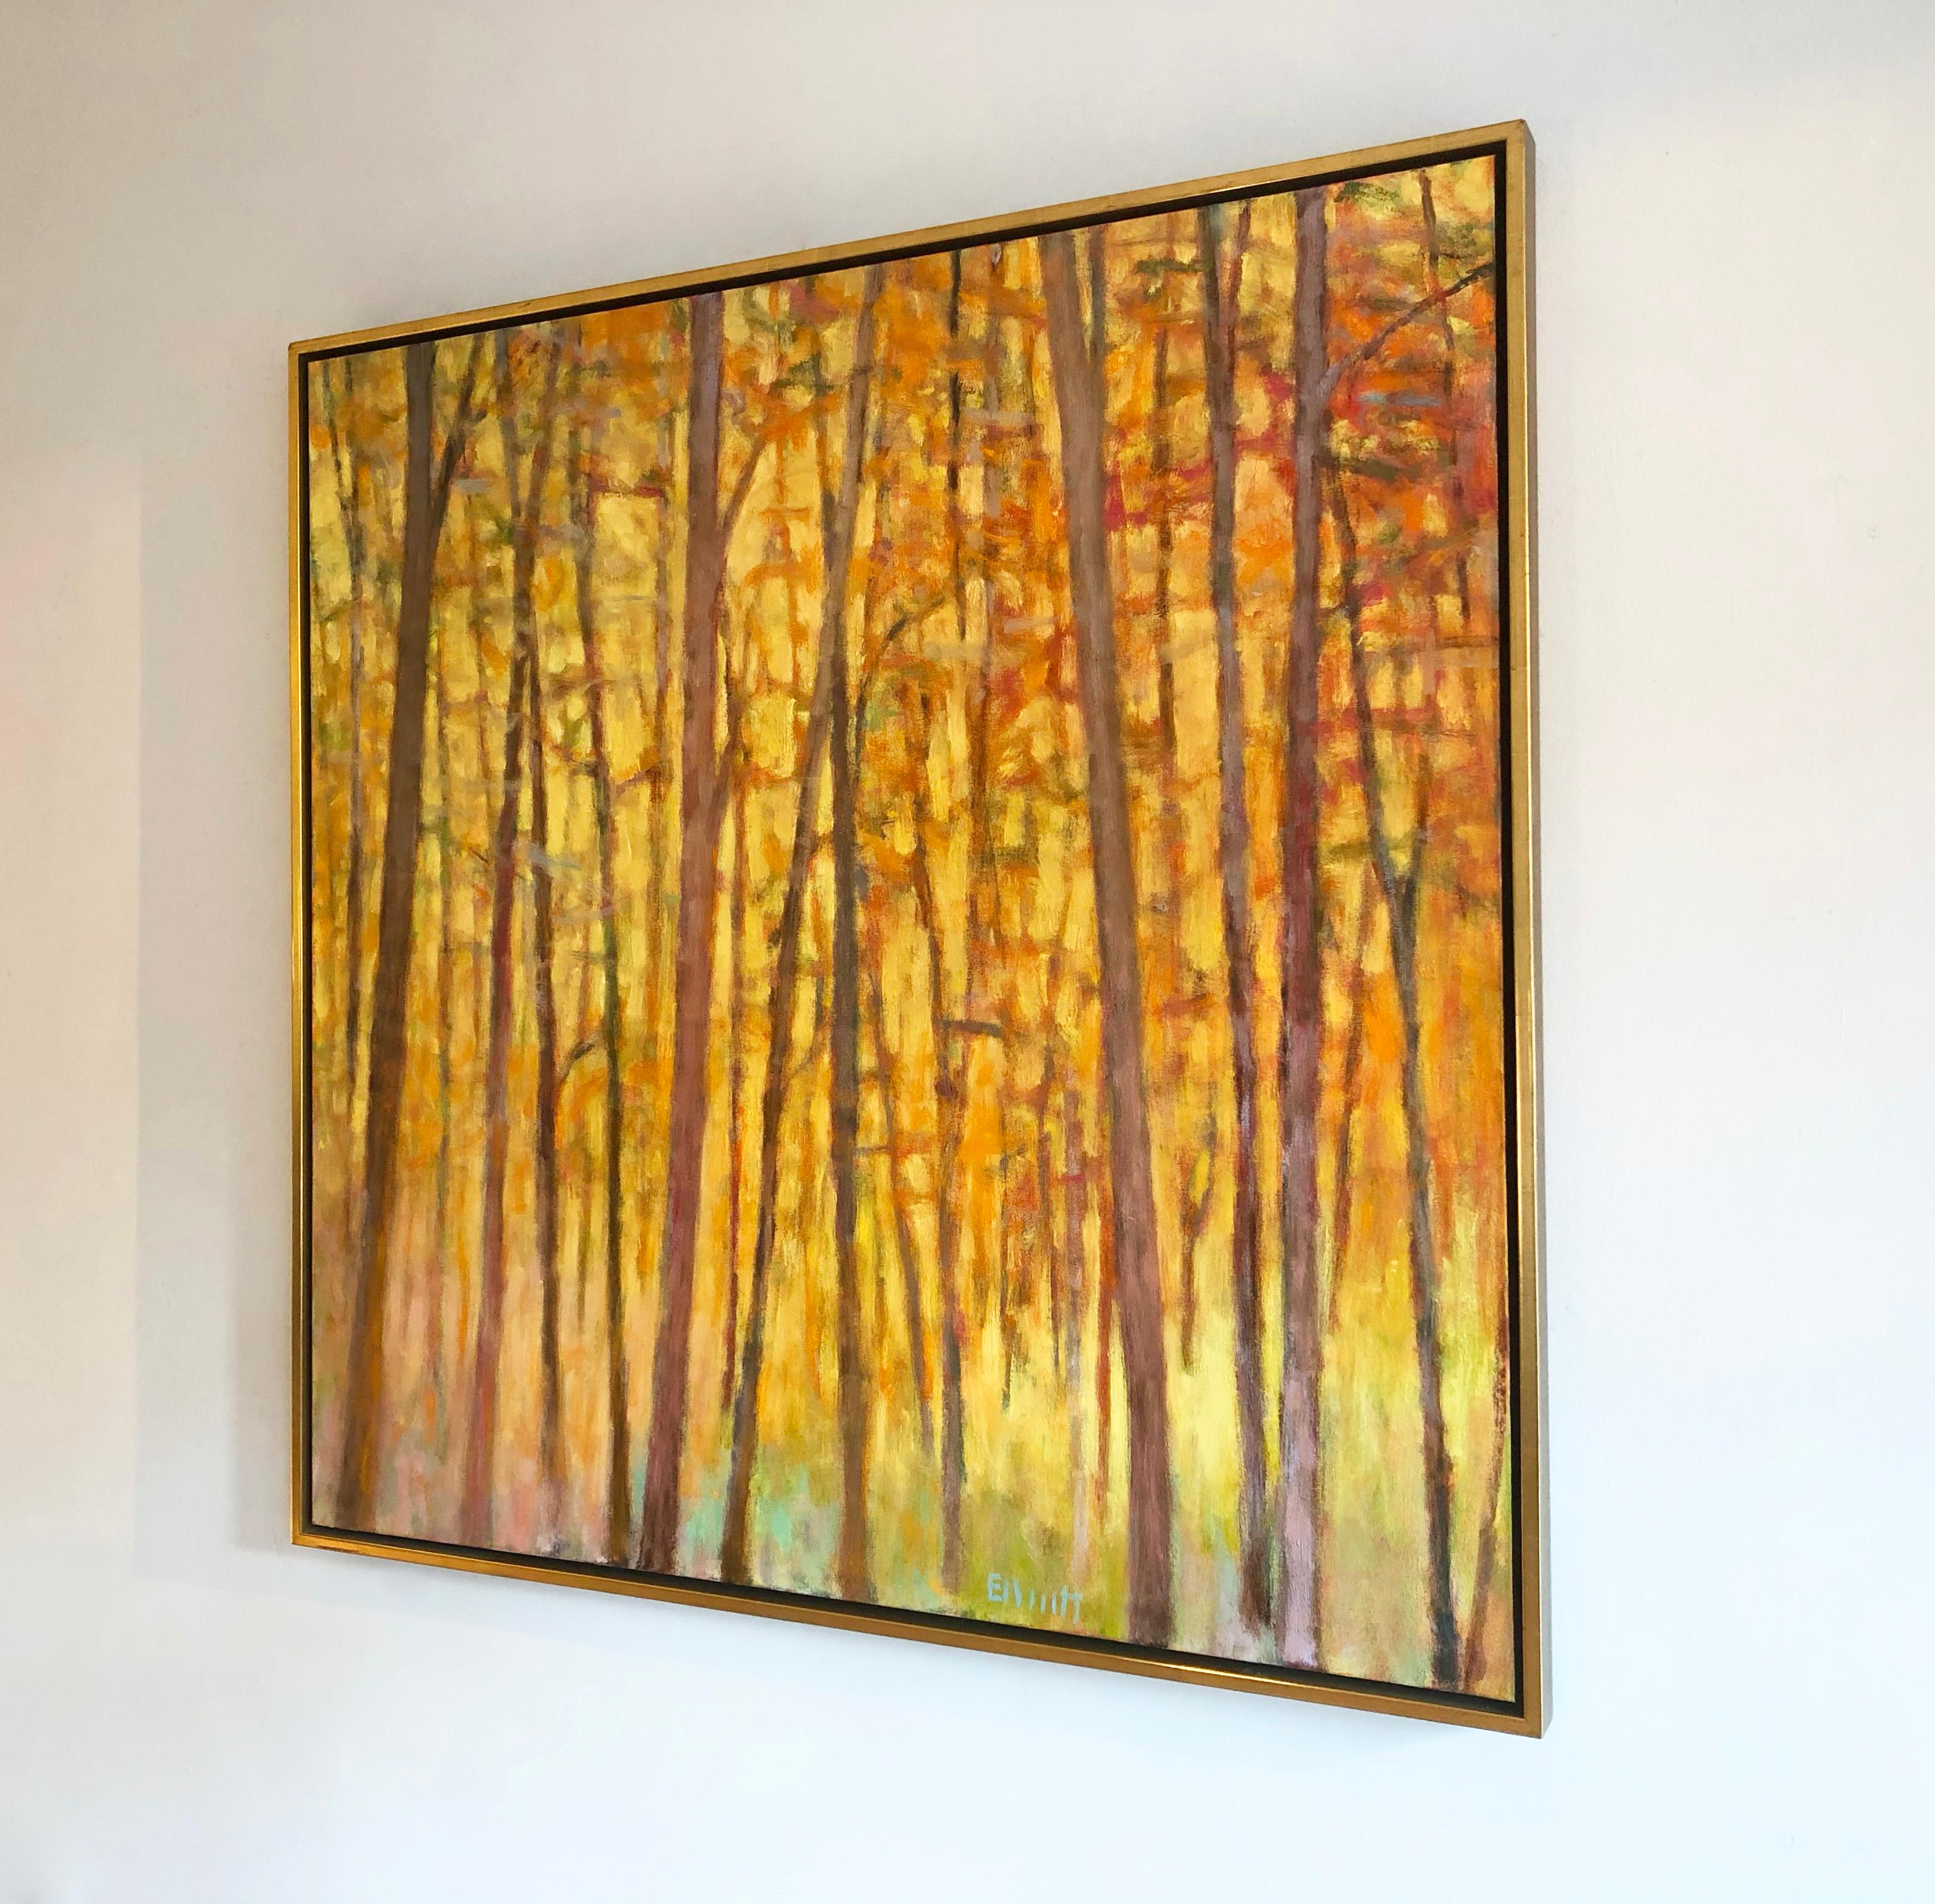 This abstract landscape painting by Ken Elliott features a warm palette. Made with oil paint on canvas, thin tree trunks are painted in warm umber tones with orange and yellow leaves and foliage surrounding them. The overall warm piece is 48